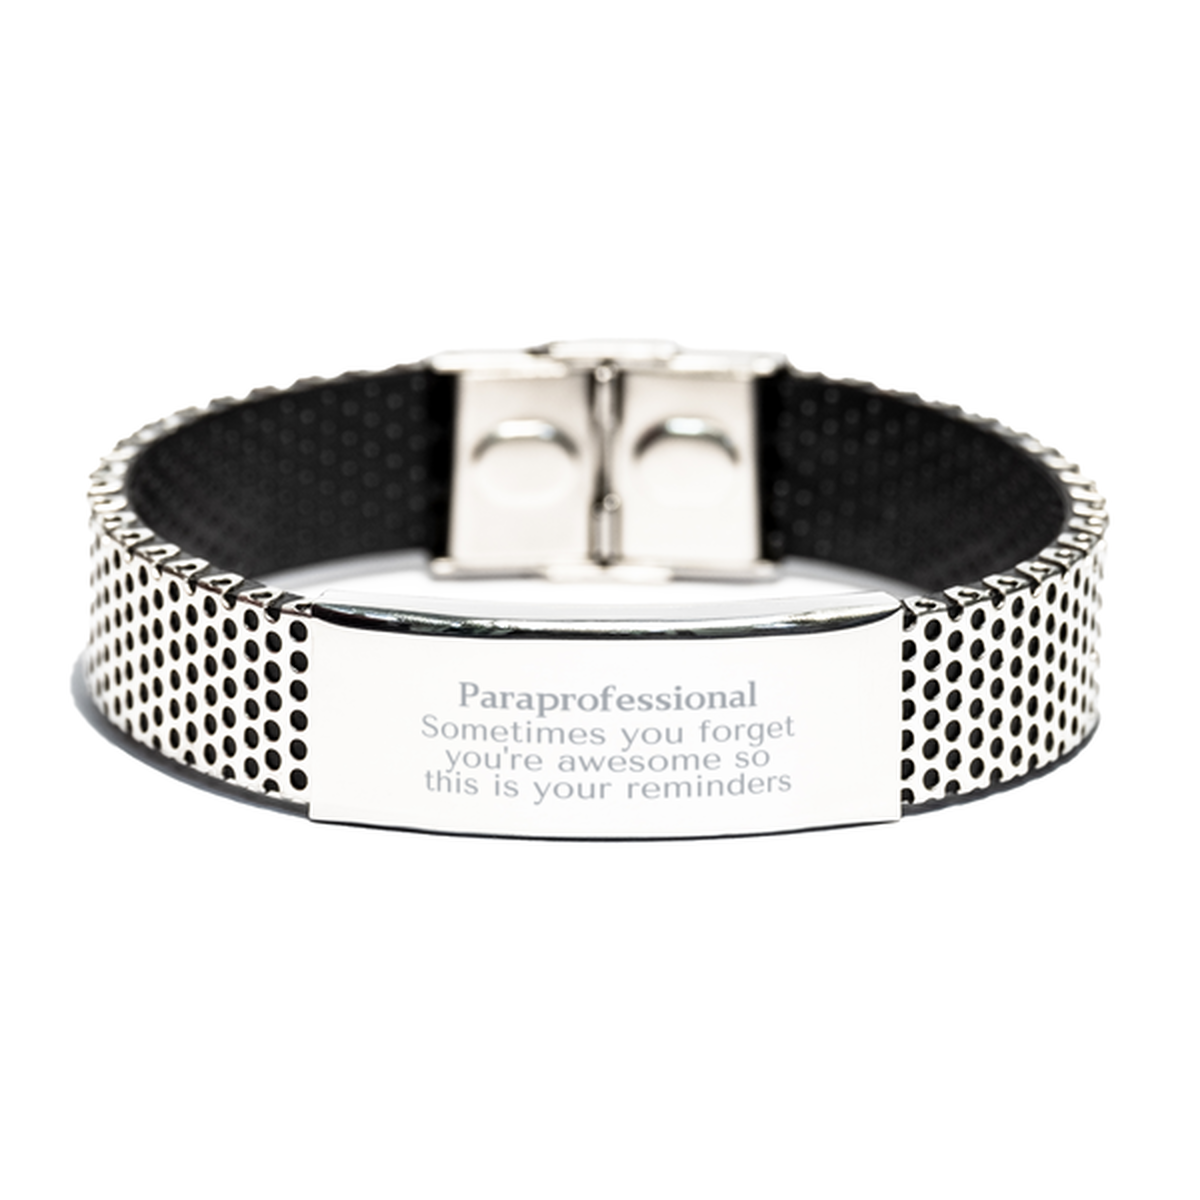 Sentimental Paraprofessional Stainless Steel Bracelet, Paraprofessional Sometimes you forget you're awesome so this is your reminders, Graduation Christmas Birthday Gifts for Paraprofessional, Men, Women, Coworkers